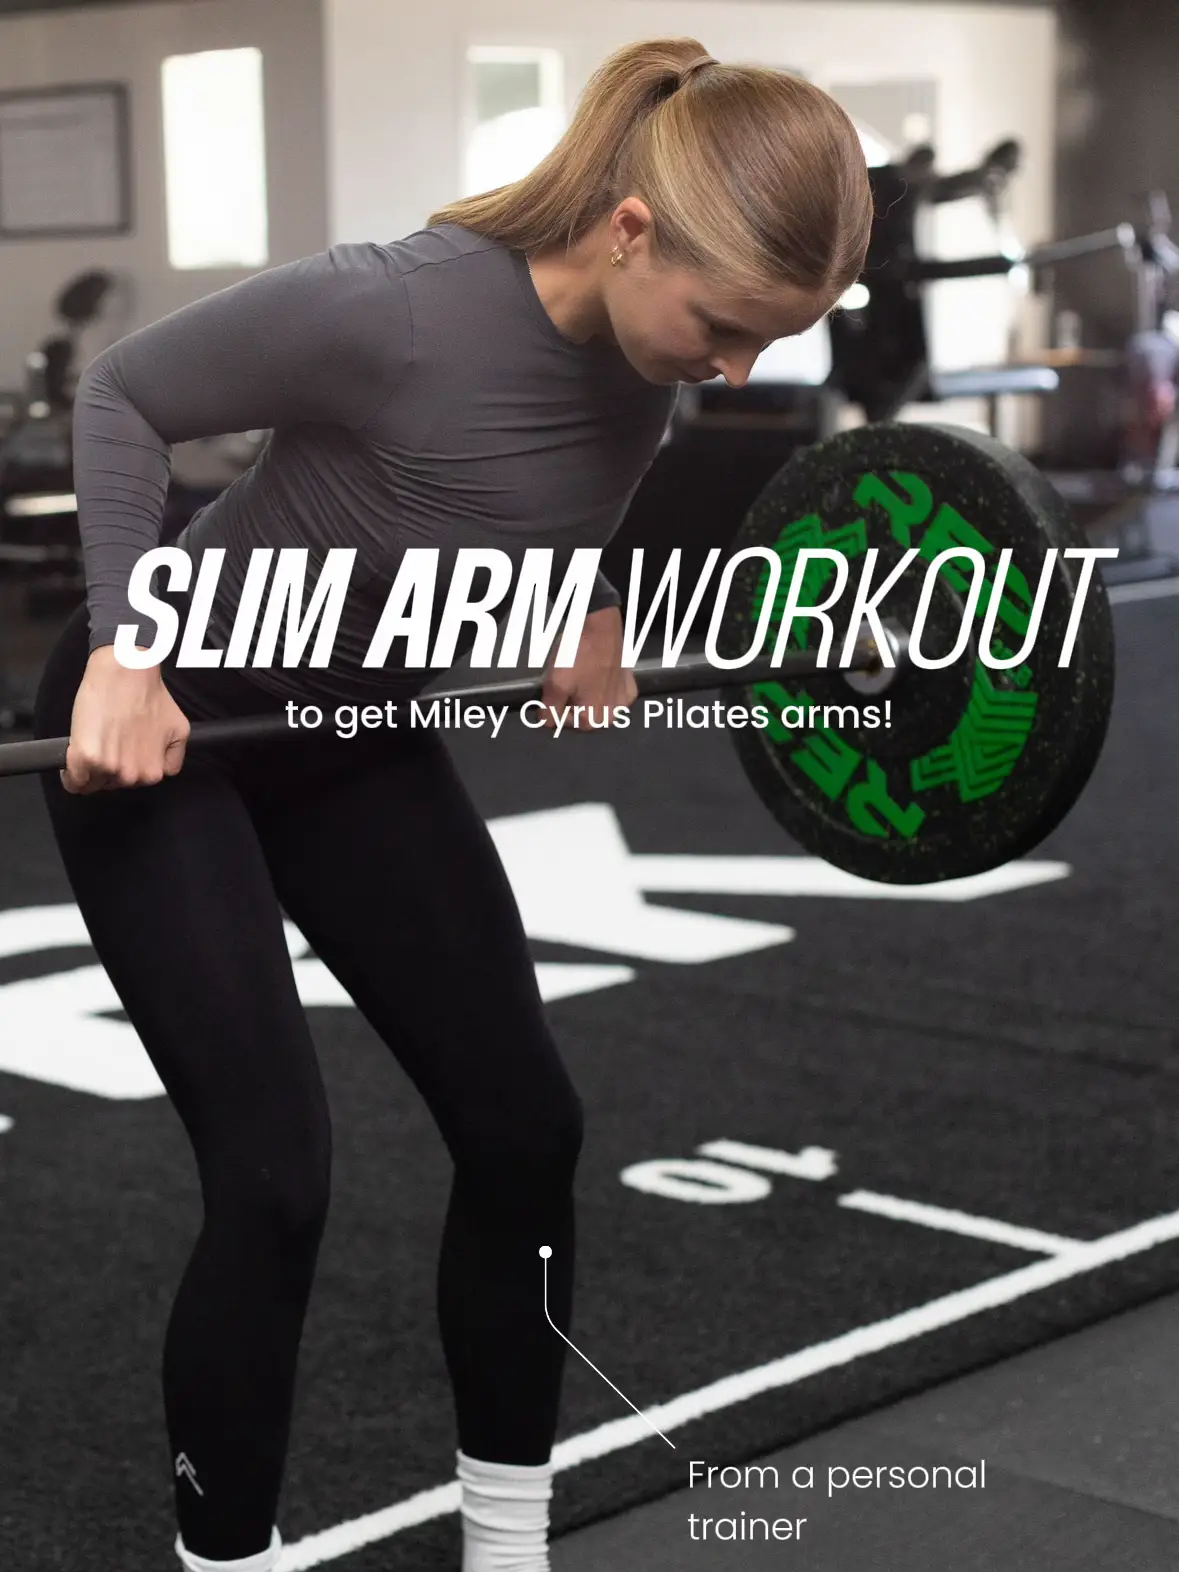 Get Miley Cyrus arms with this workout💪, Gallery posted by Megan Snyder